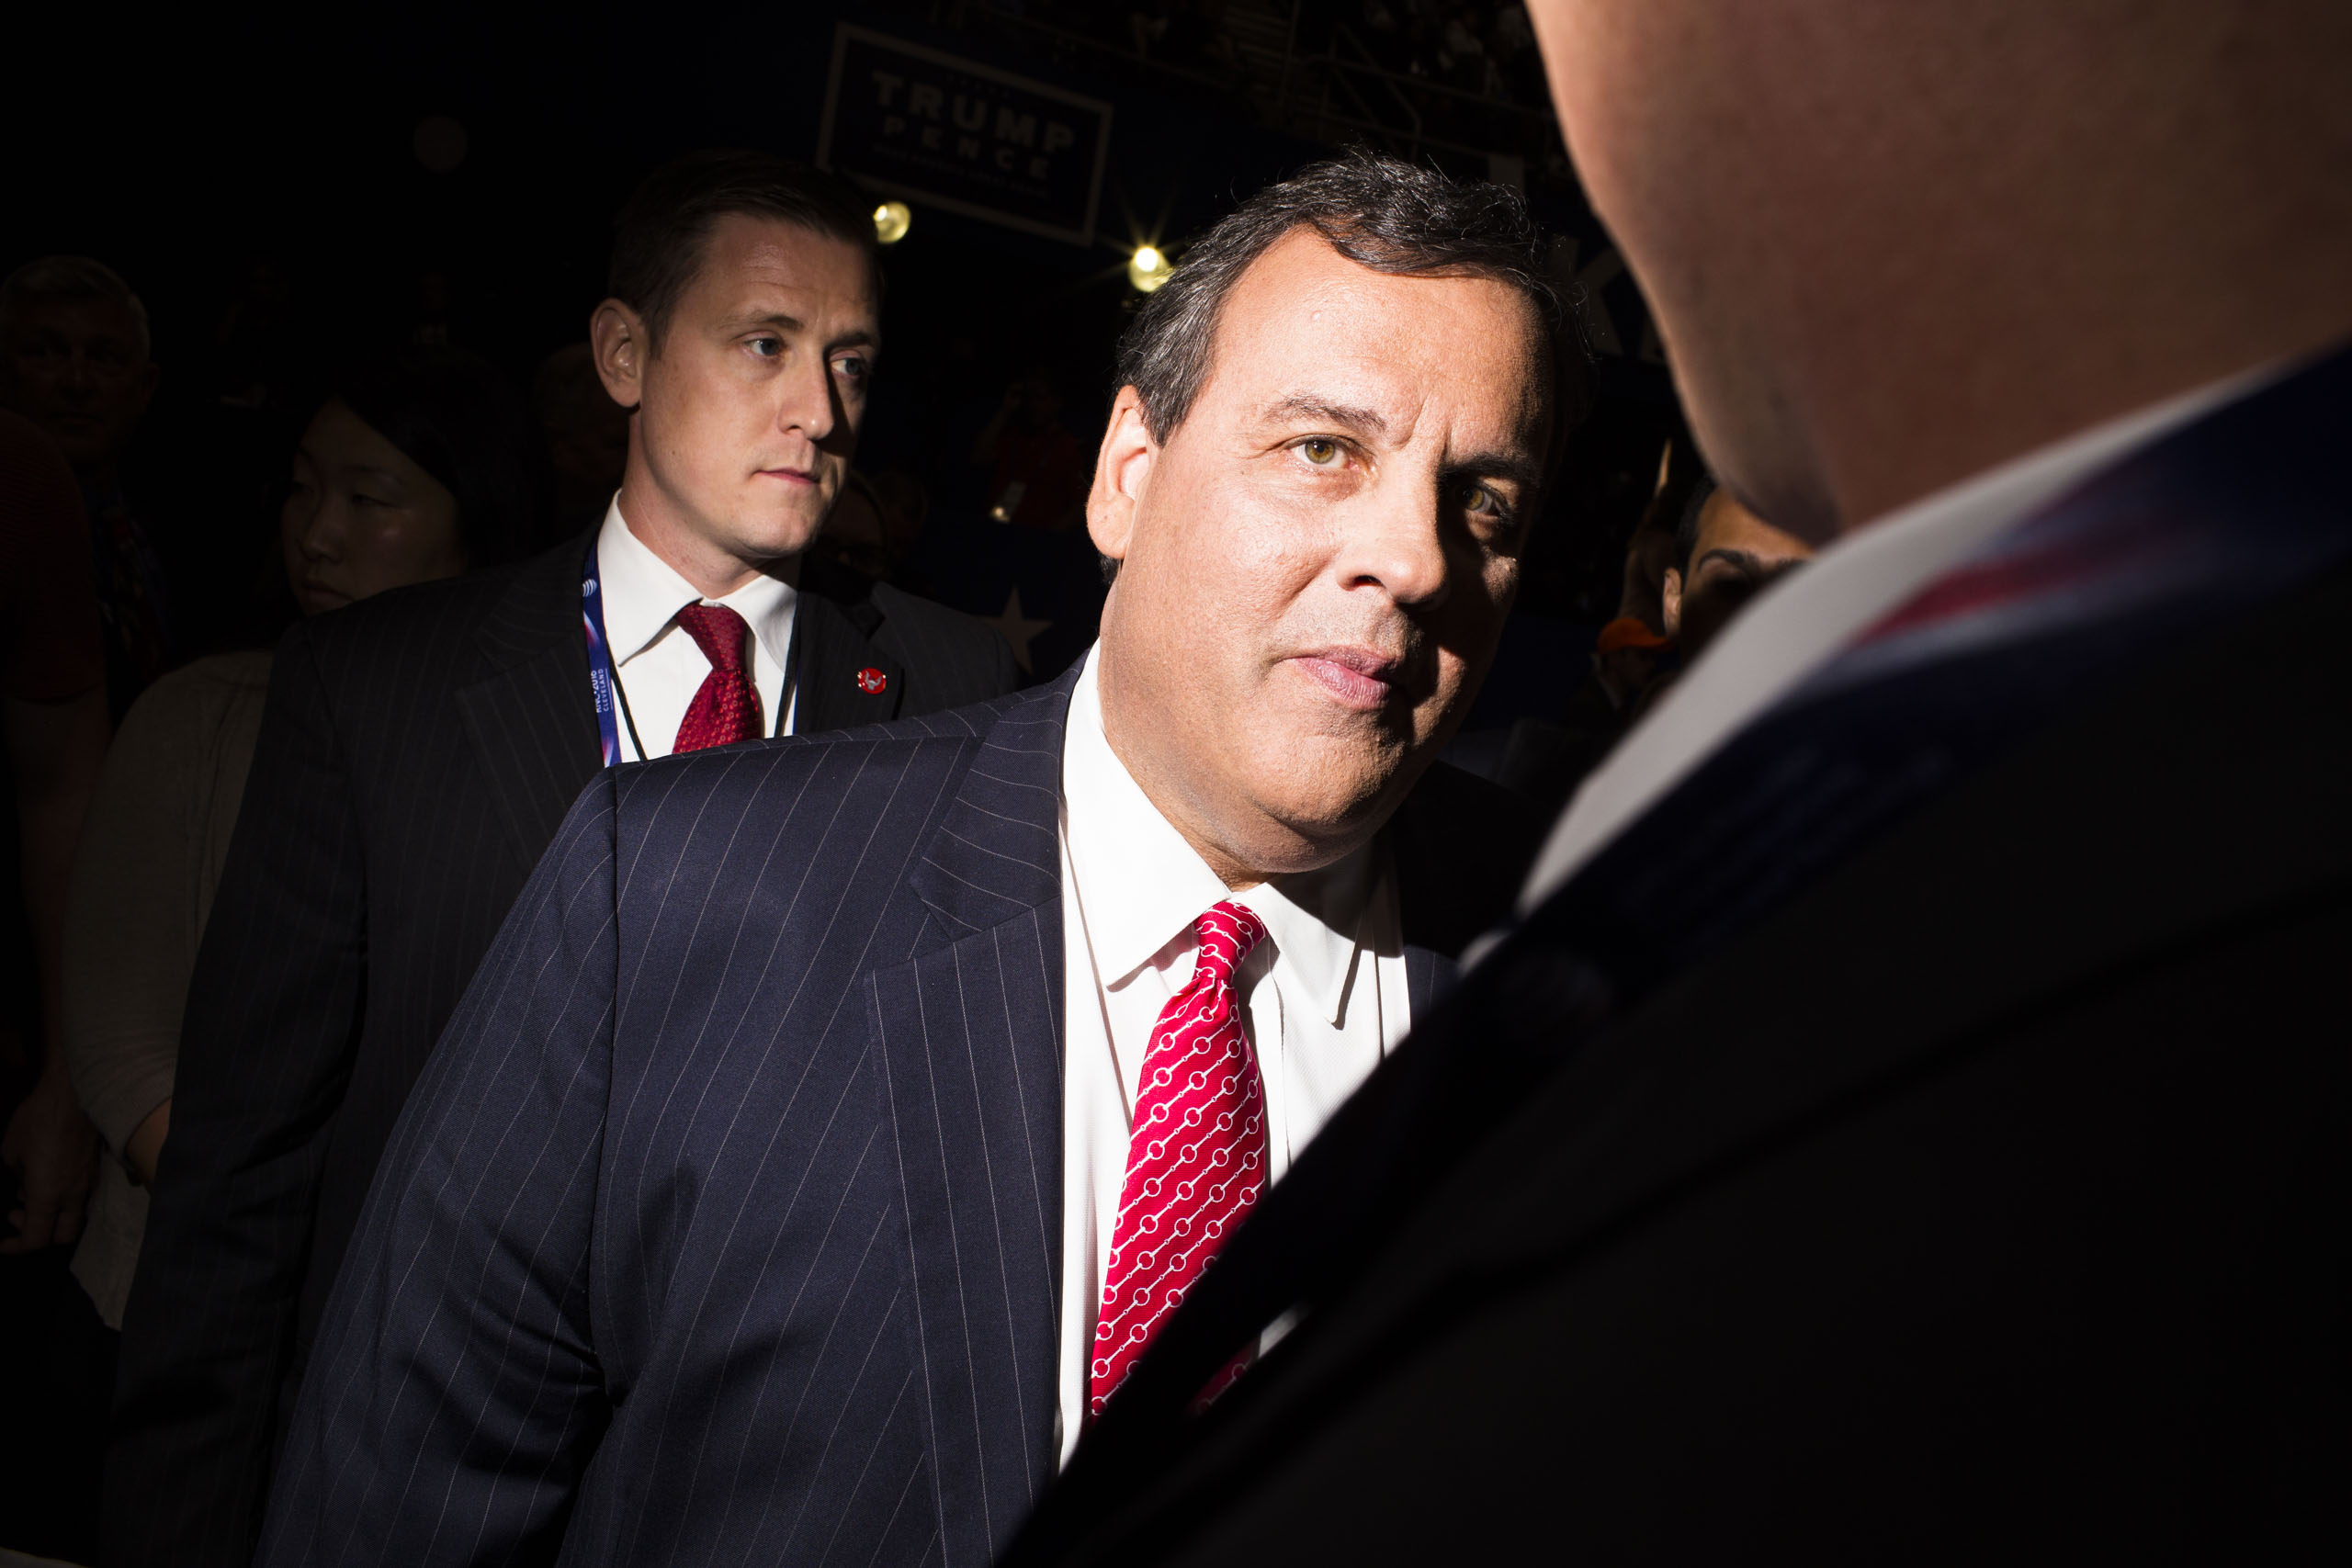 New Jersey Gov. Chris Christie attends the 2016 Republican National Convention in Cleveland on Tuesday, July 19, 2016.